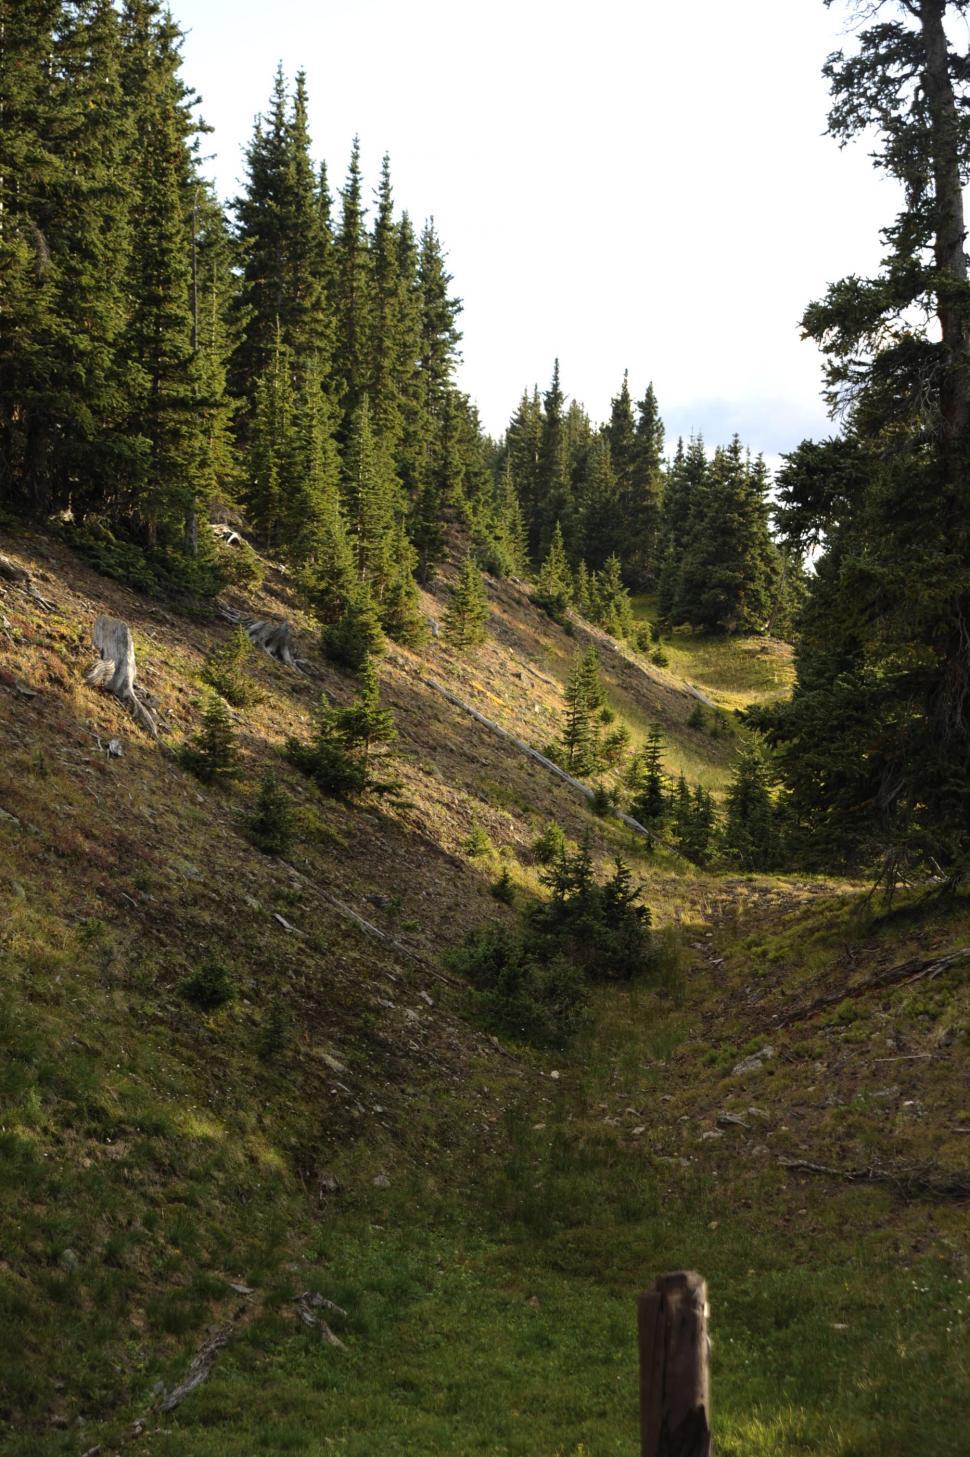 Free Image of Trees on Slope  